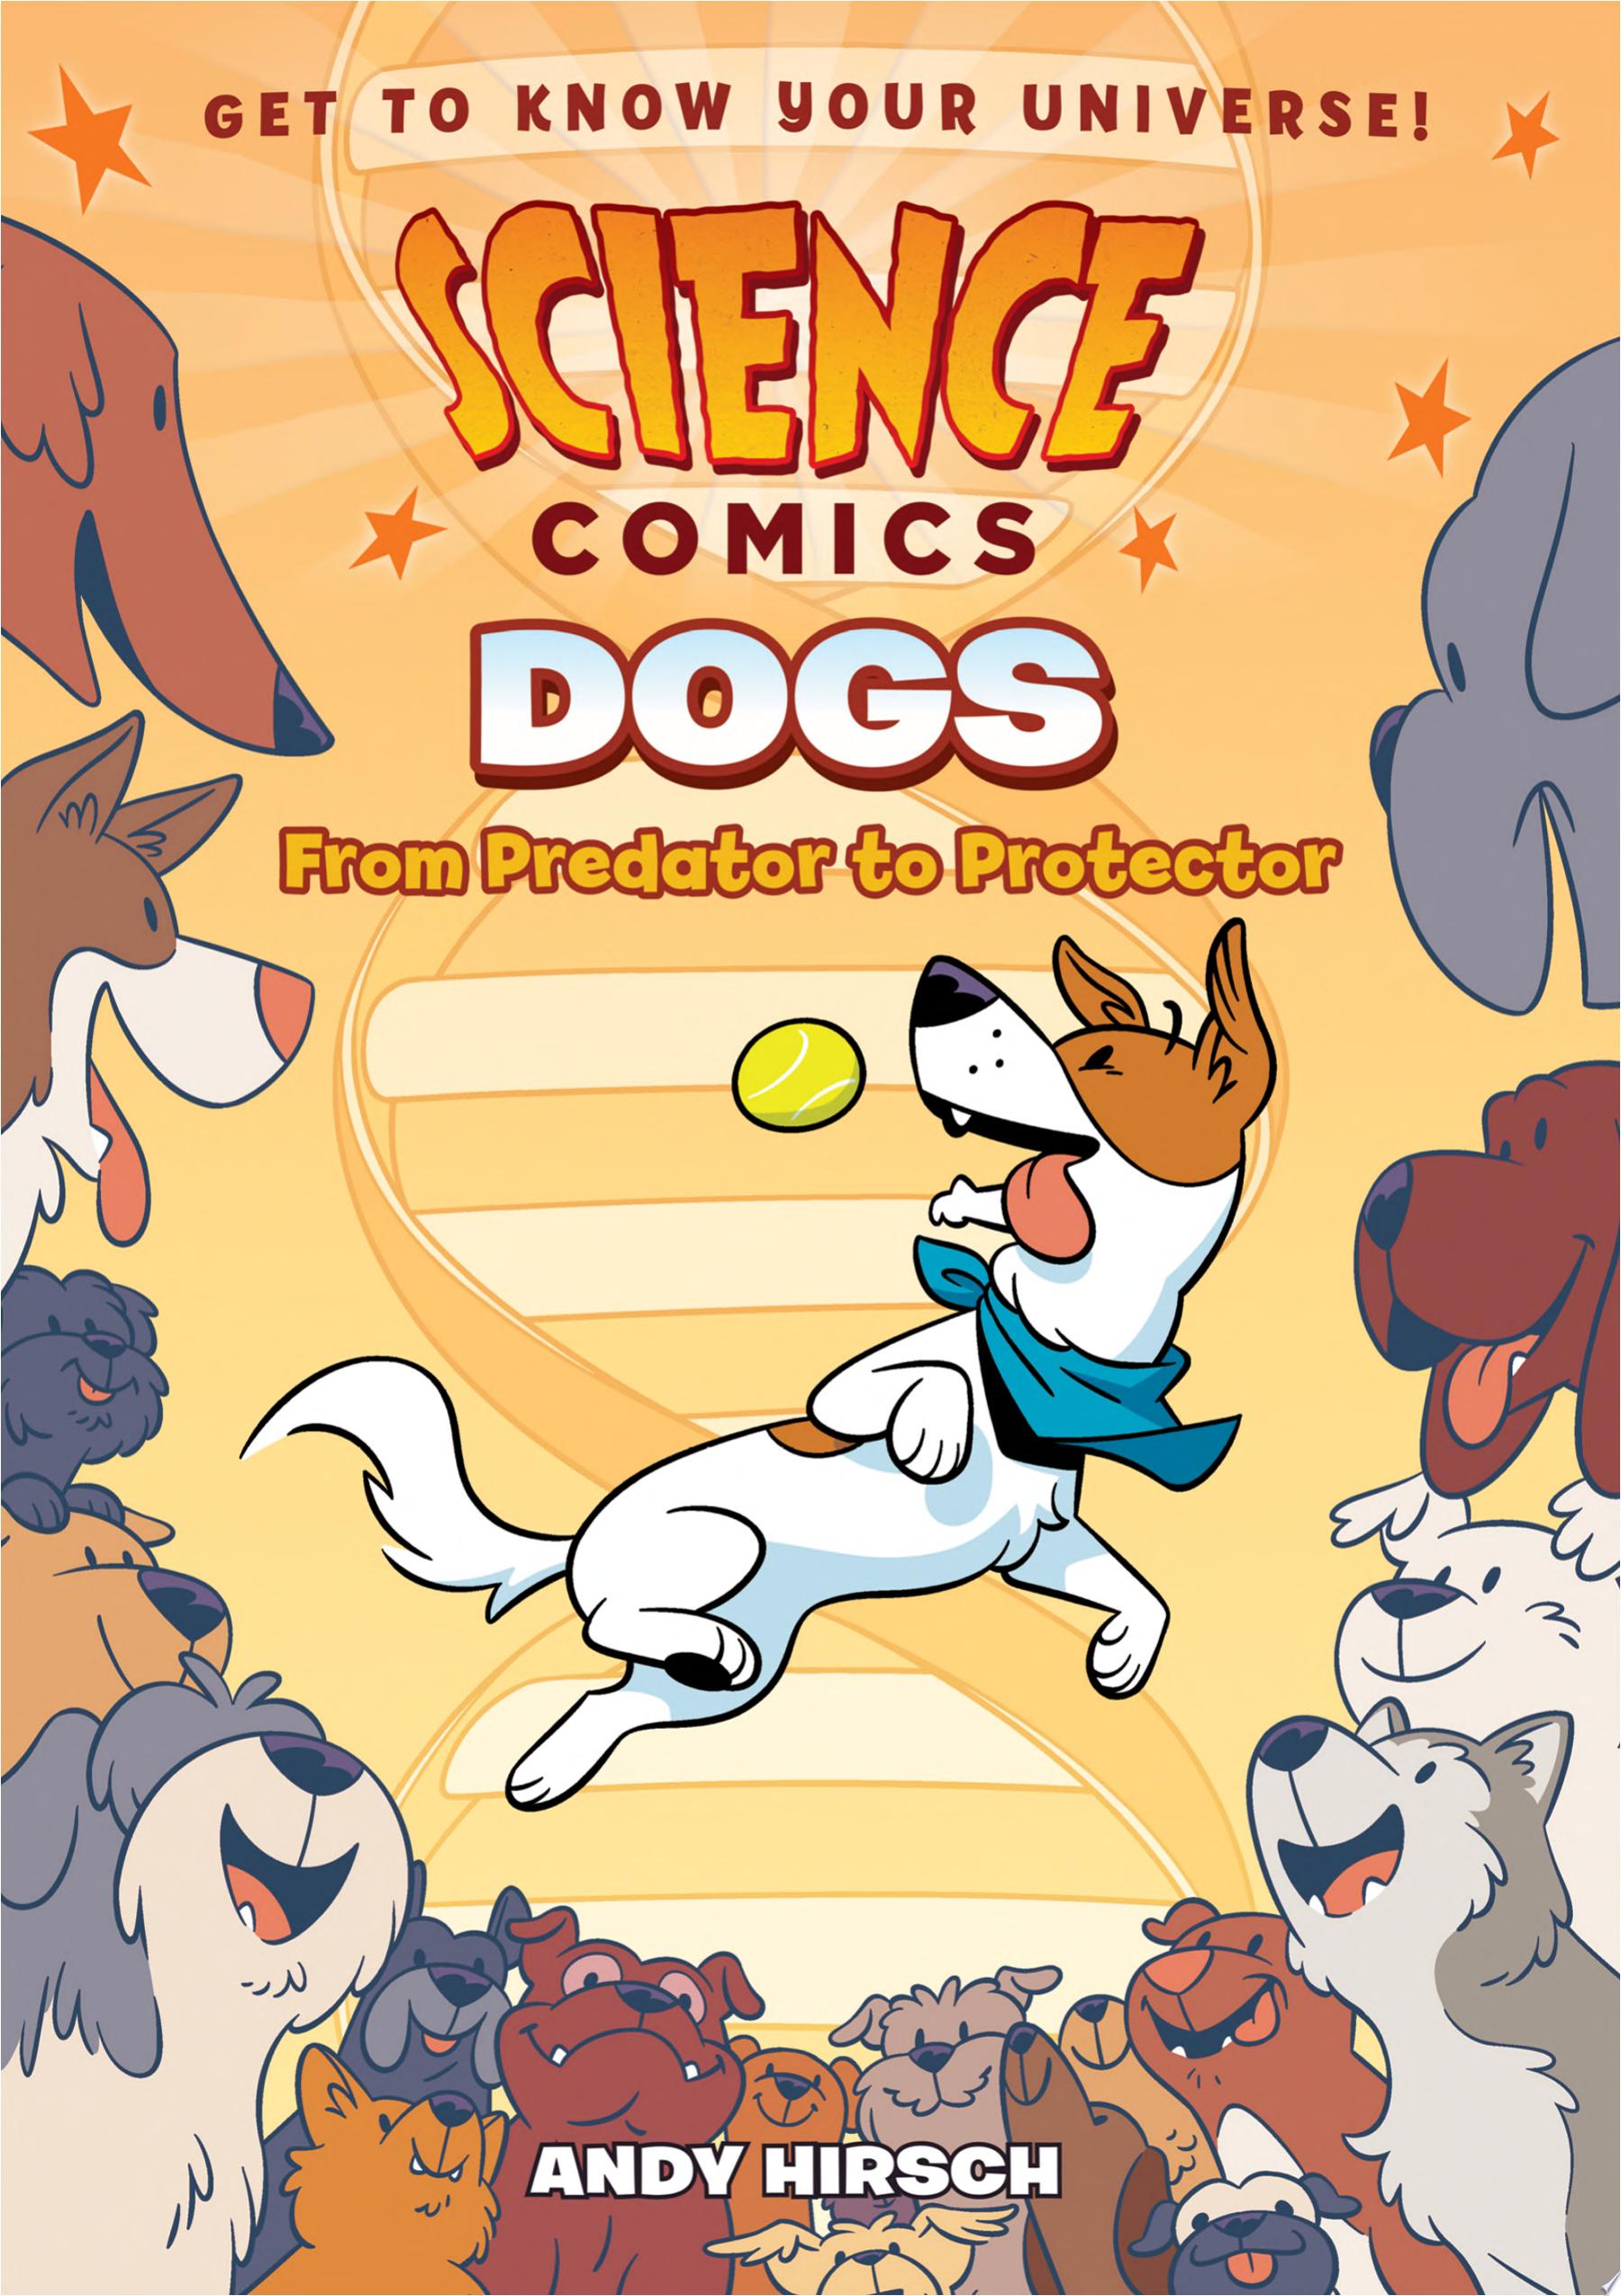 Image for "Science Comics: Dogs"